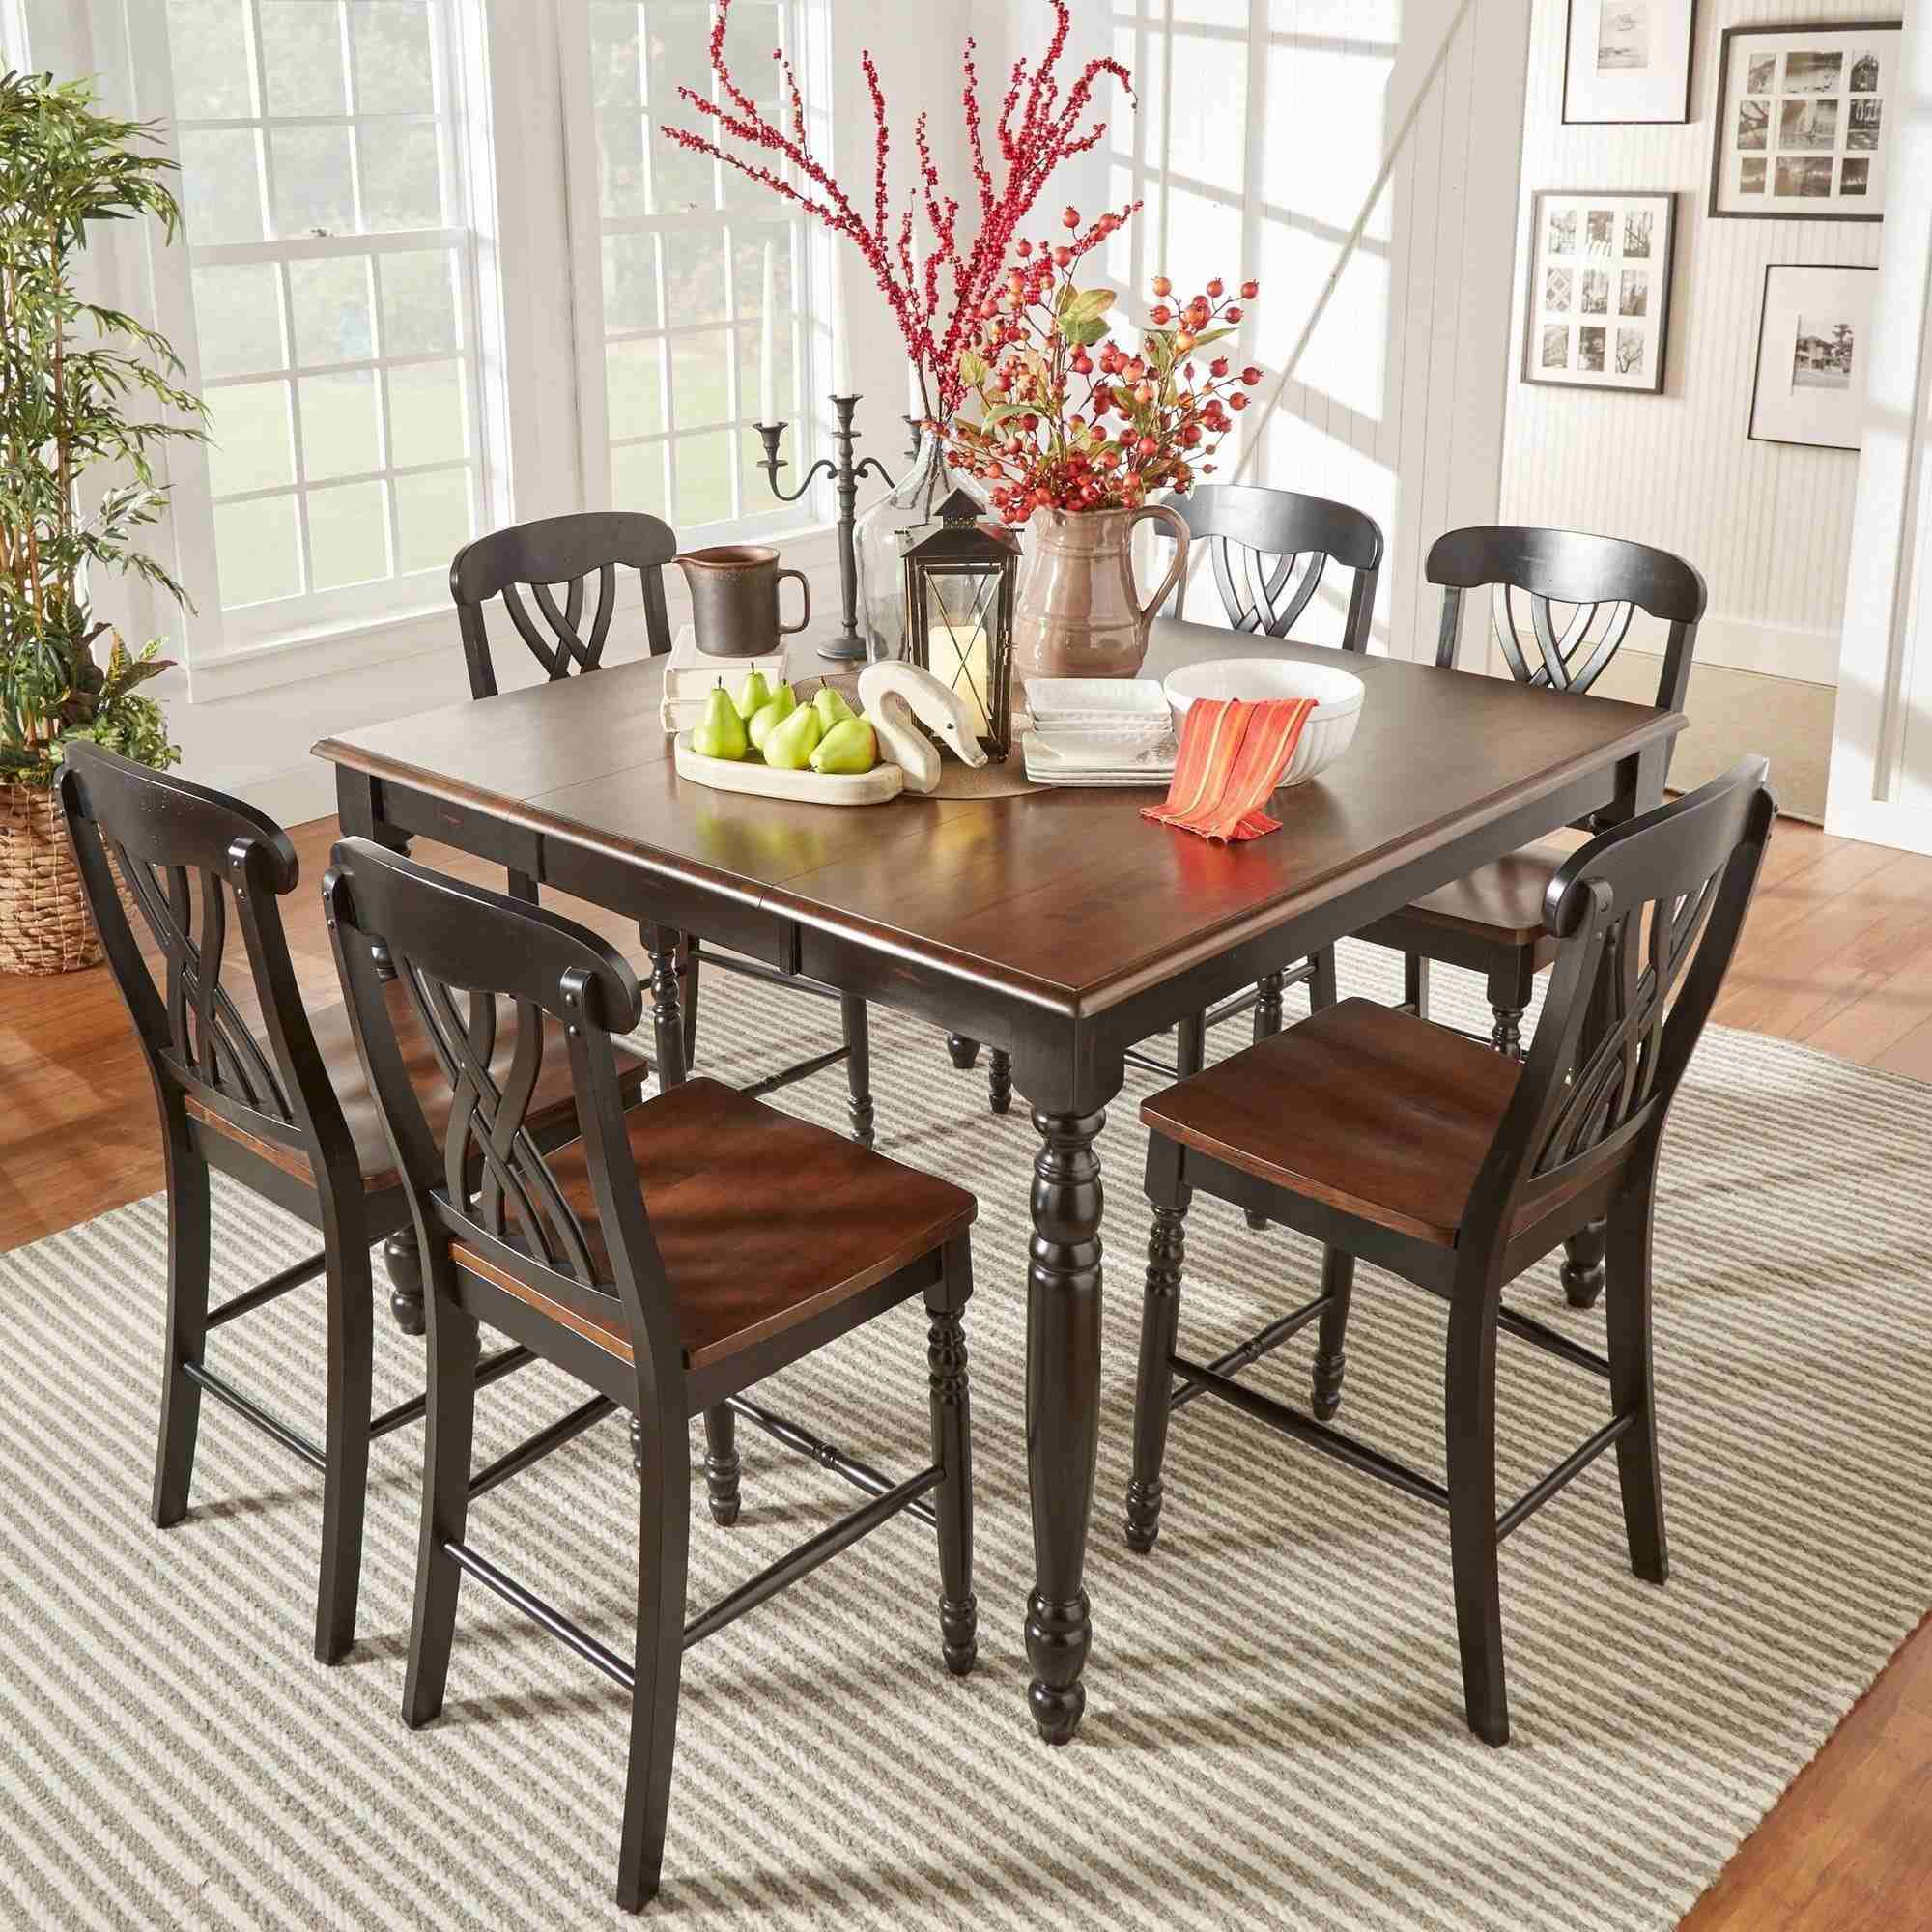 Dining Room Chairs Kijiji Calgary 2019 Home Design intended for measurements 2000 X 2000